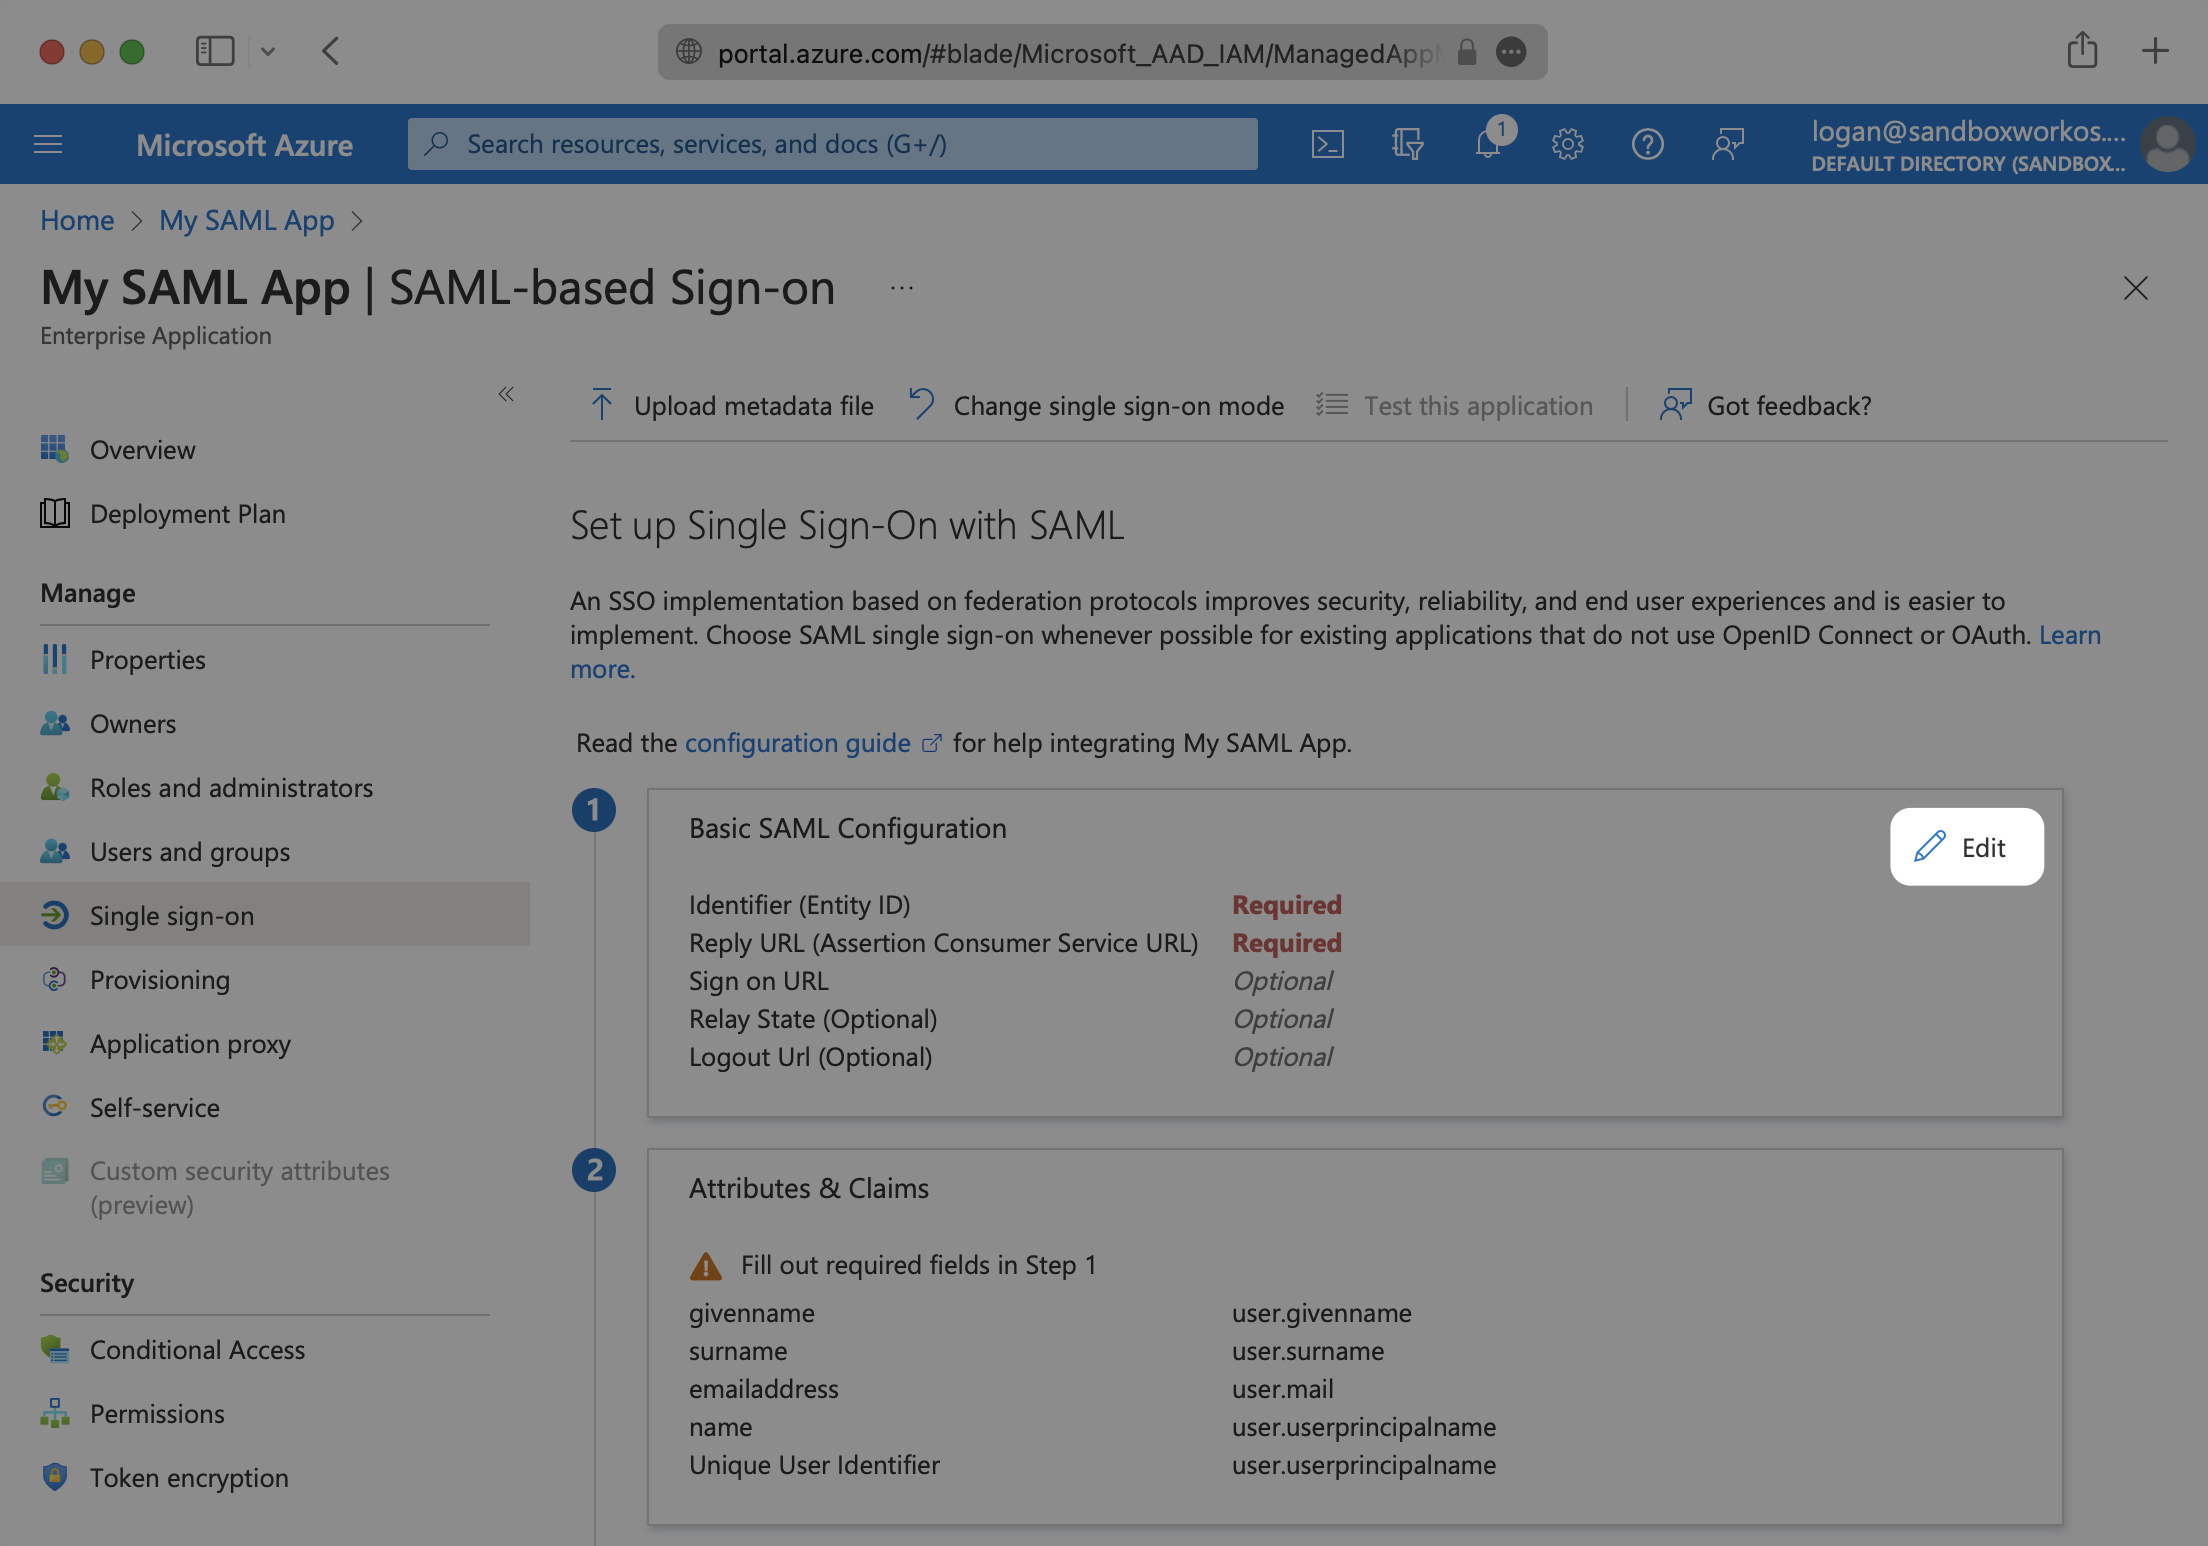 A screenshot showing where to select "Edit" for the "Basic SAML Configuration" step in the Azure dashboard.